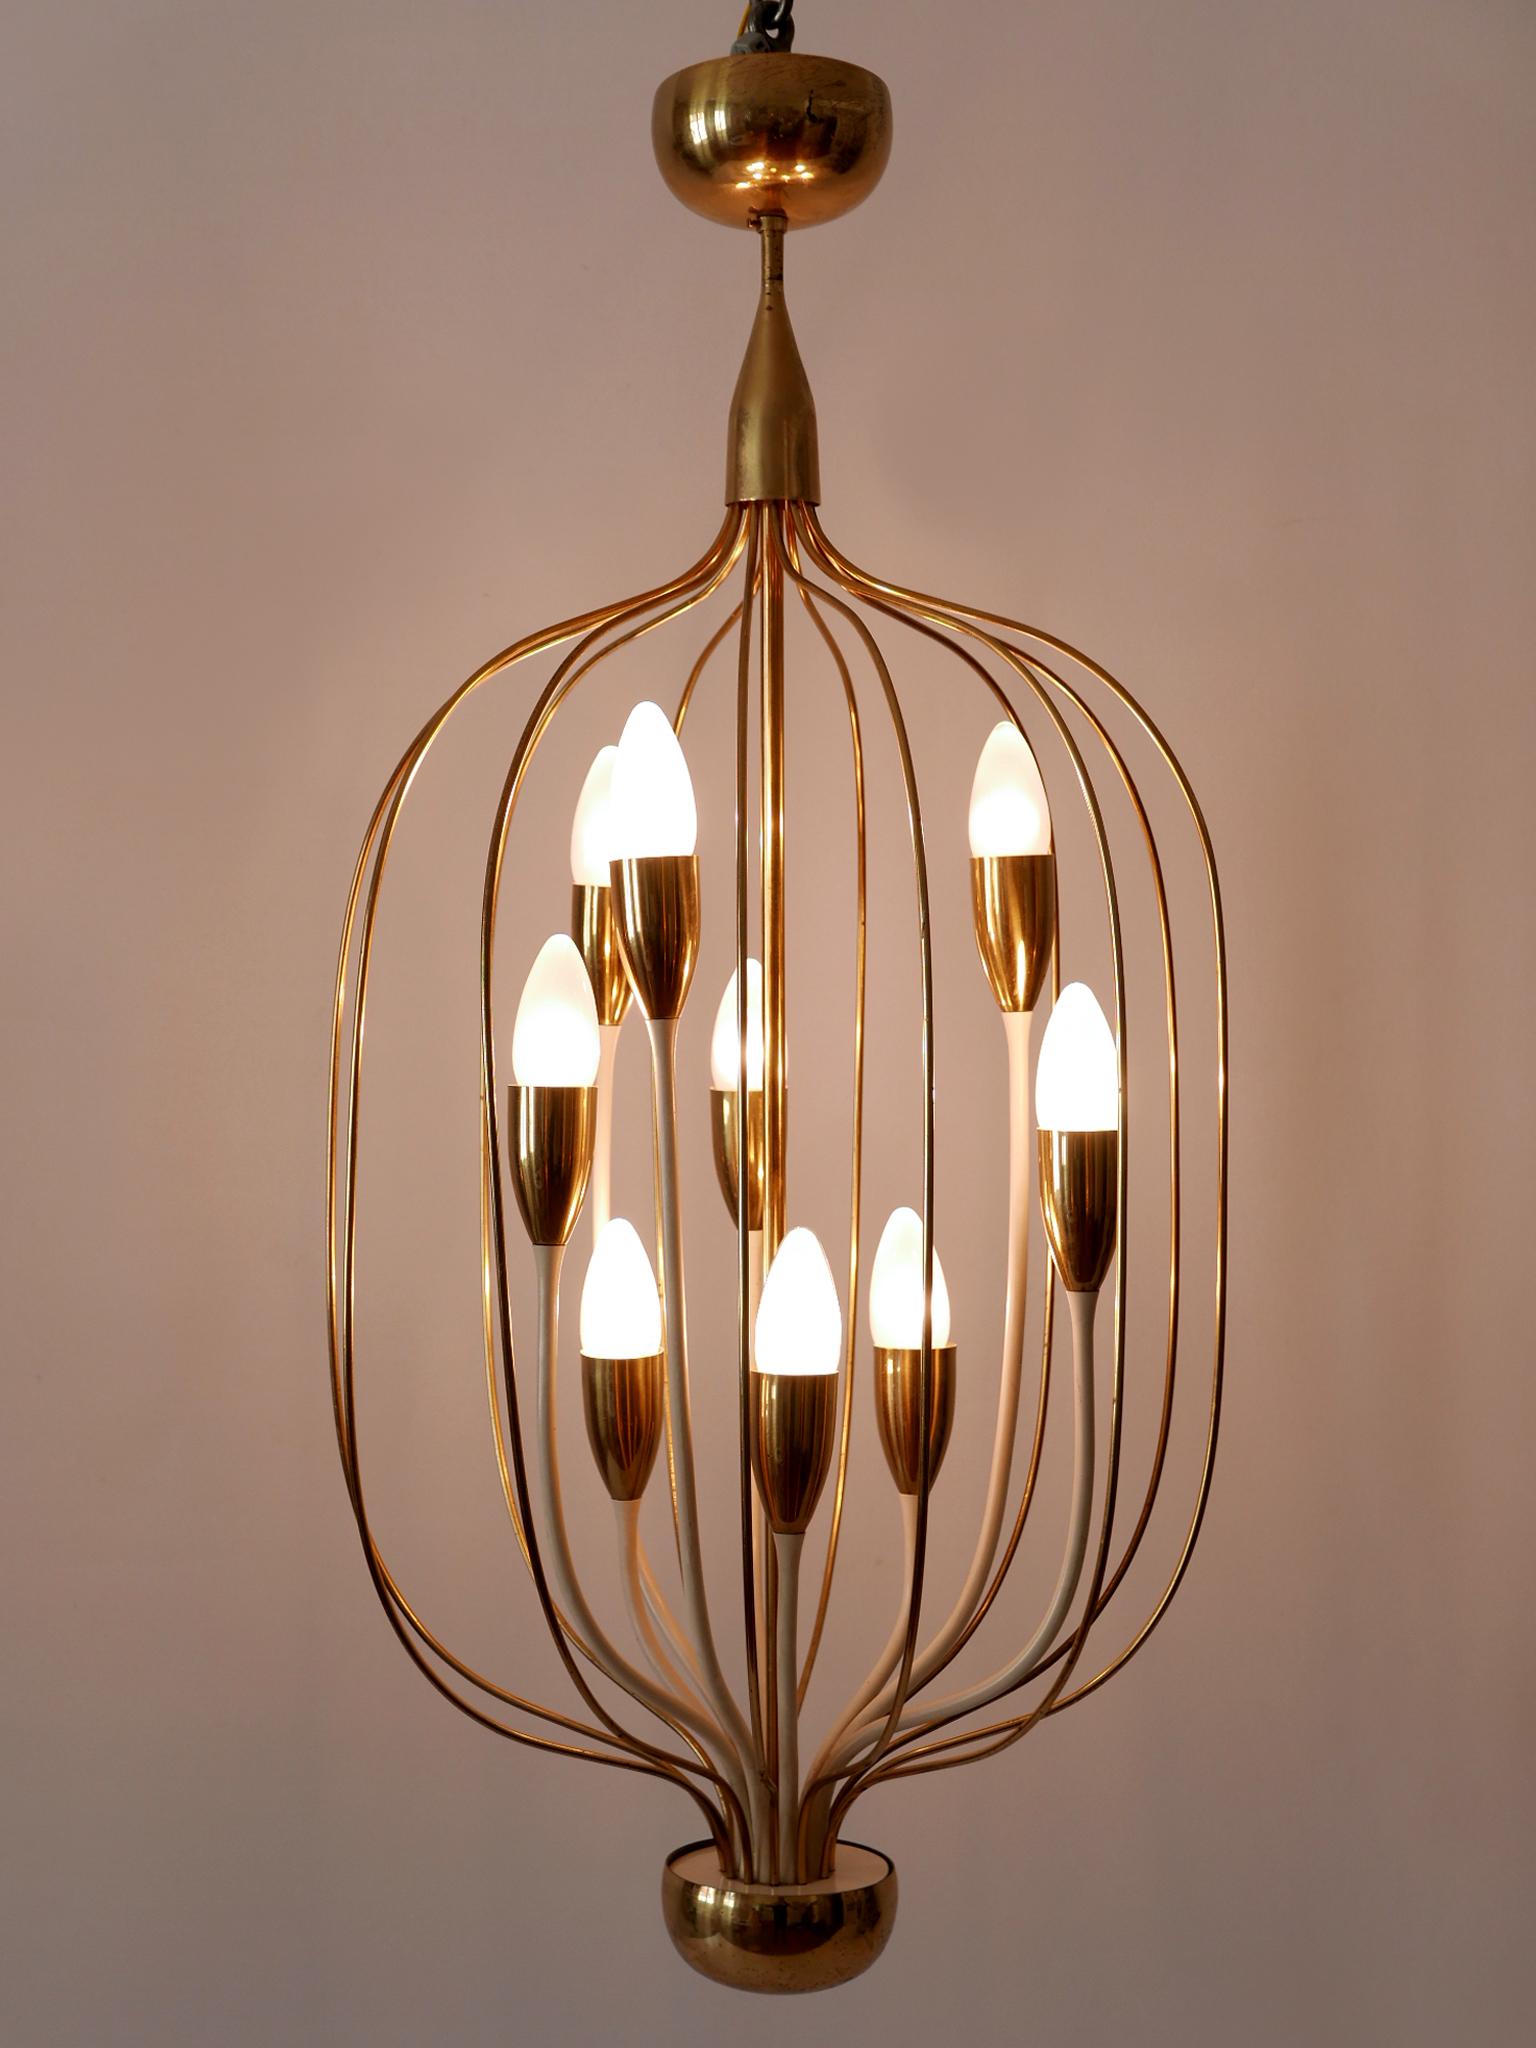 Extremely rare, lovely and highly decorative Mid-Century Modern nine-flamed pendant lamp or chandelier. Designed and manufactured probably in Germany, 1950s.

Executed in brass, the pendant lamp / chandelier comes with 9 x E14 / E12 Edison screw fit